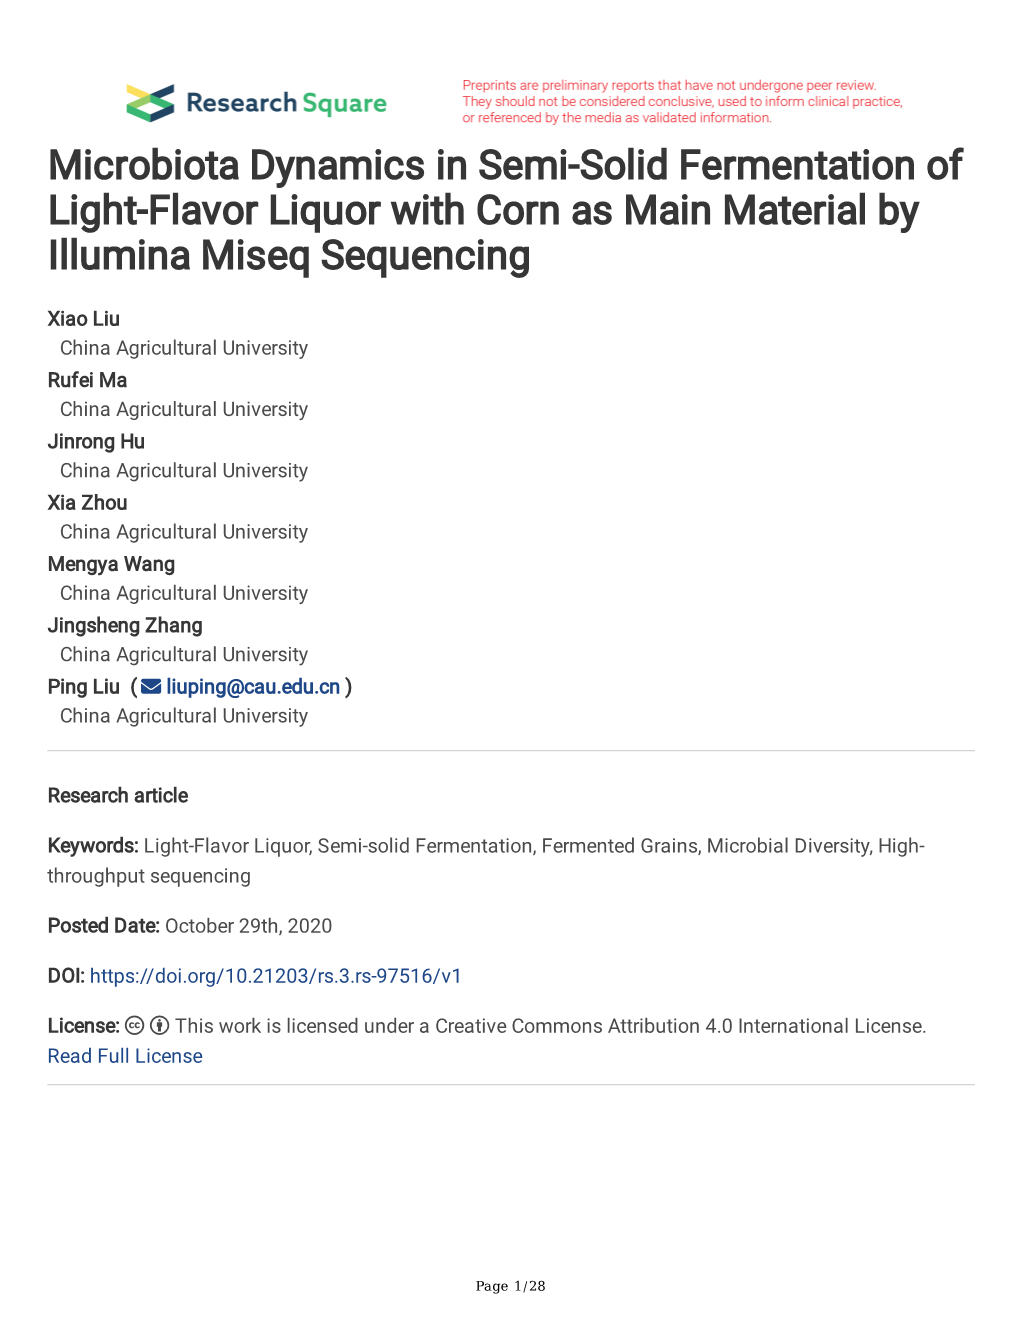 Microbiota Dynamics in Semi-Solid Fermentation of Light-Flavor Liquor with Corn As Main Material by Illumina Miseq Sequencing